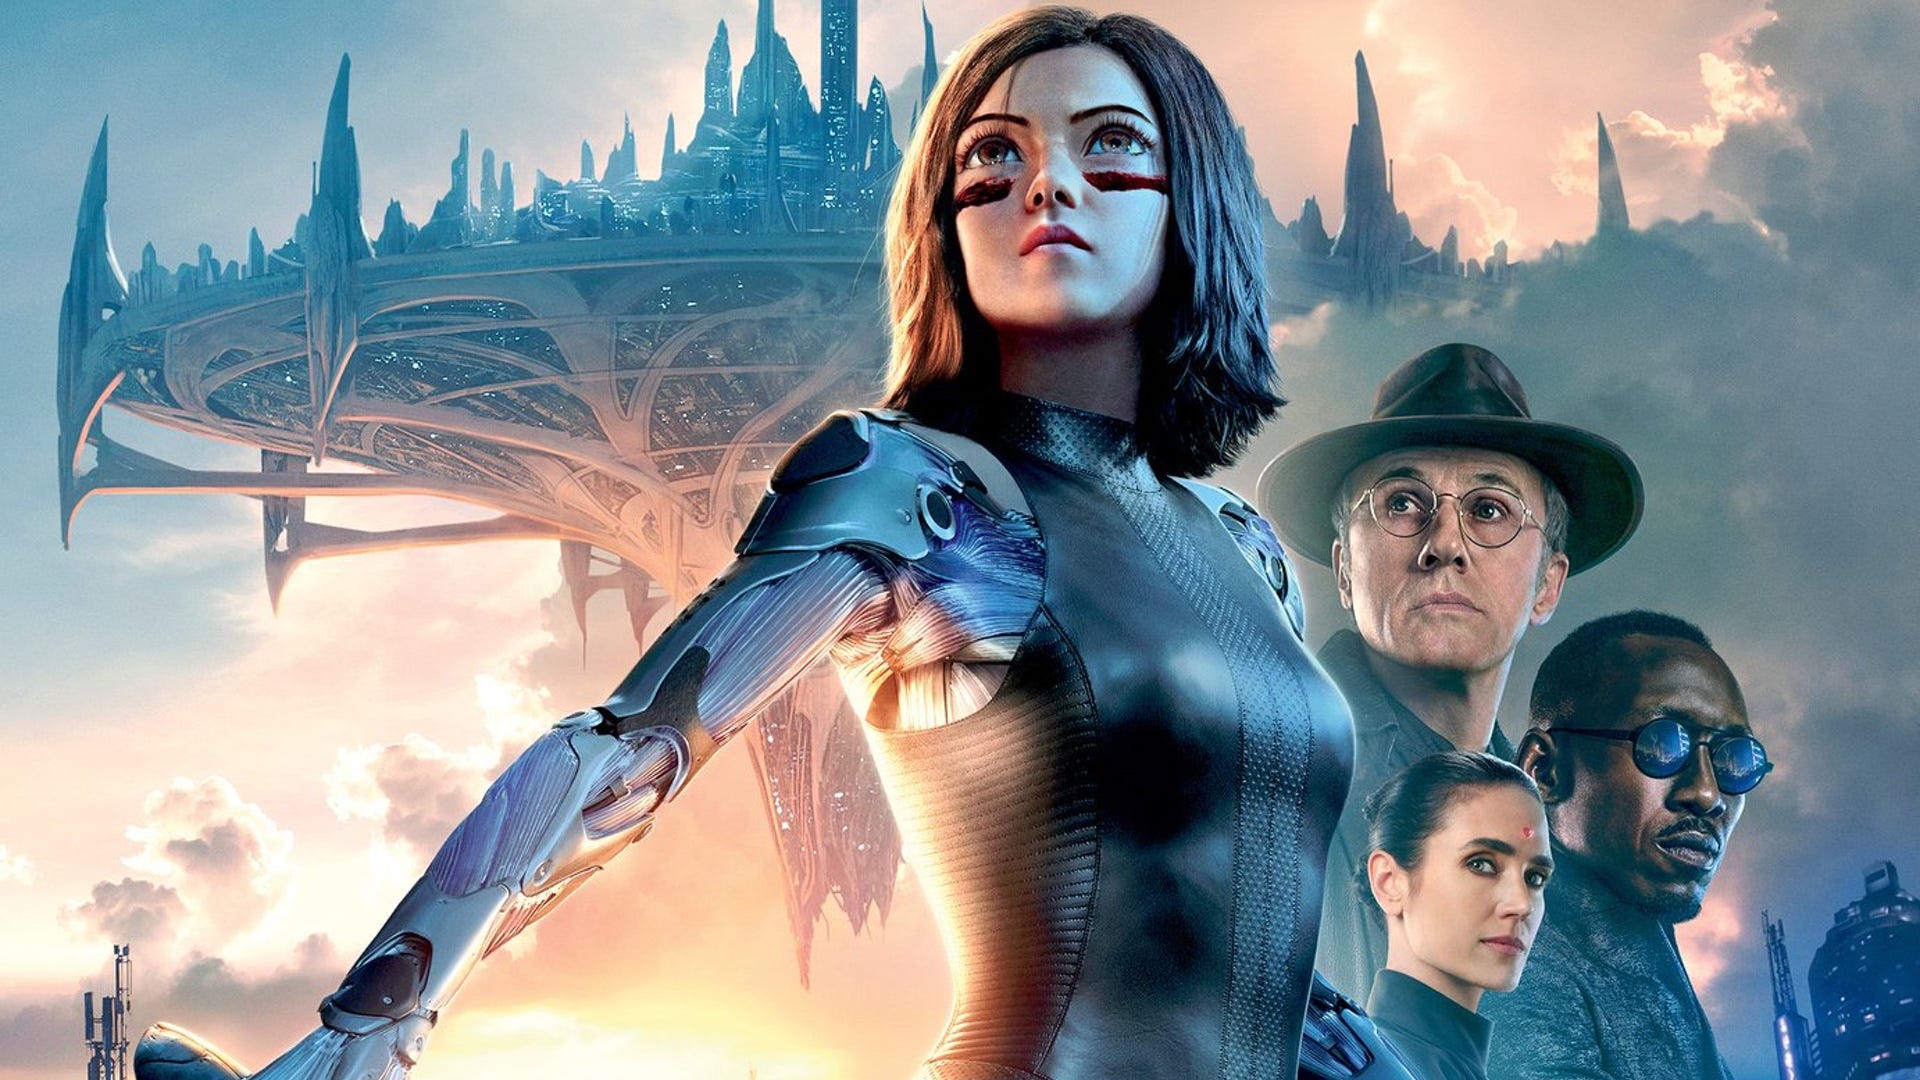 Alita: Battle Angel and the Integrity of the Human | by Victoria  Vouloumanos | Medium